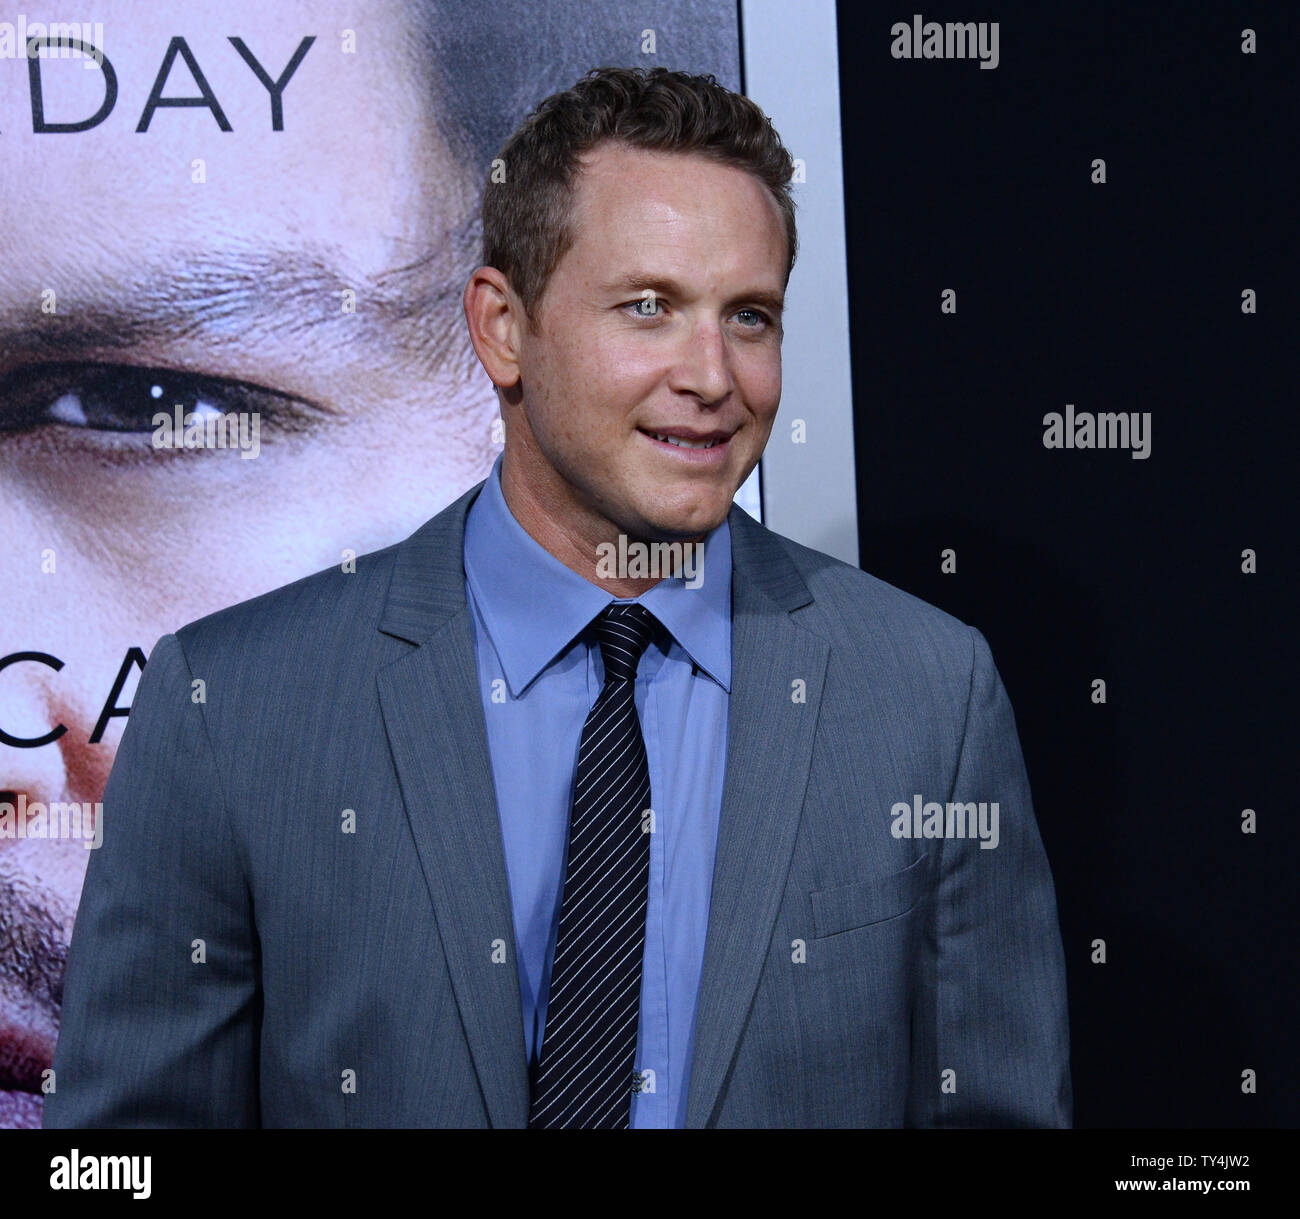 Cast member Cole Hauser attends the premiere of the sci-fi motion picture thriller 'Transcendence' at the Regency Village Theatre in the Westwood section of Los Angeles on April 10, 2014 Storyline: A terminally ill scientist uploads his mind to a computer. This grants him power beyond his wildest dreams, and soon he becomes unstoppable.   UPI/Jim Ruymen Stock Photo